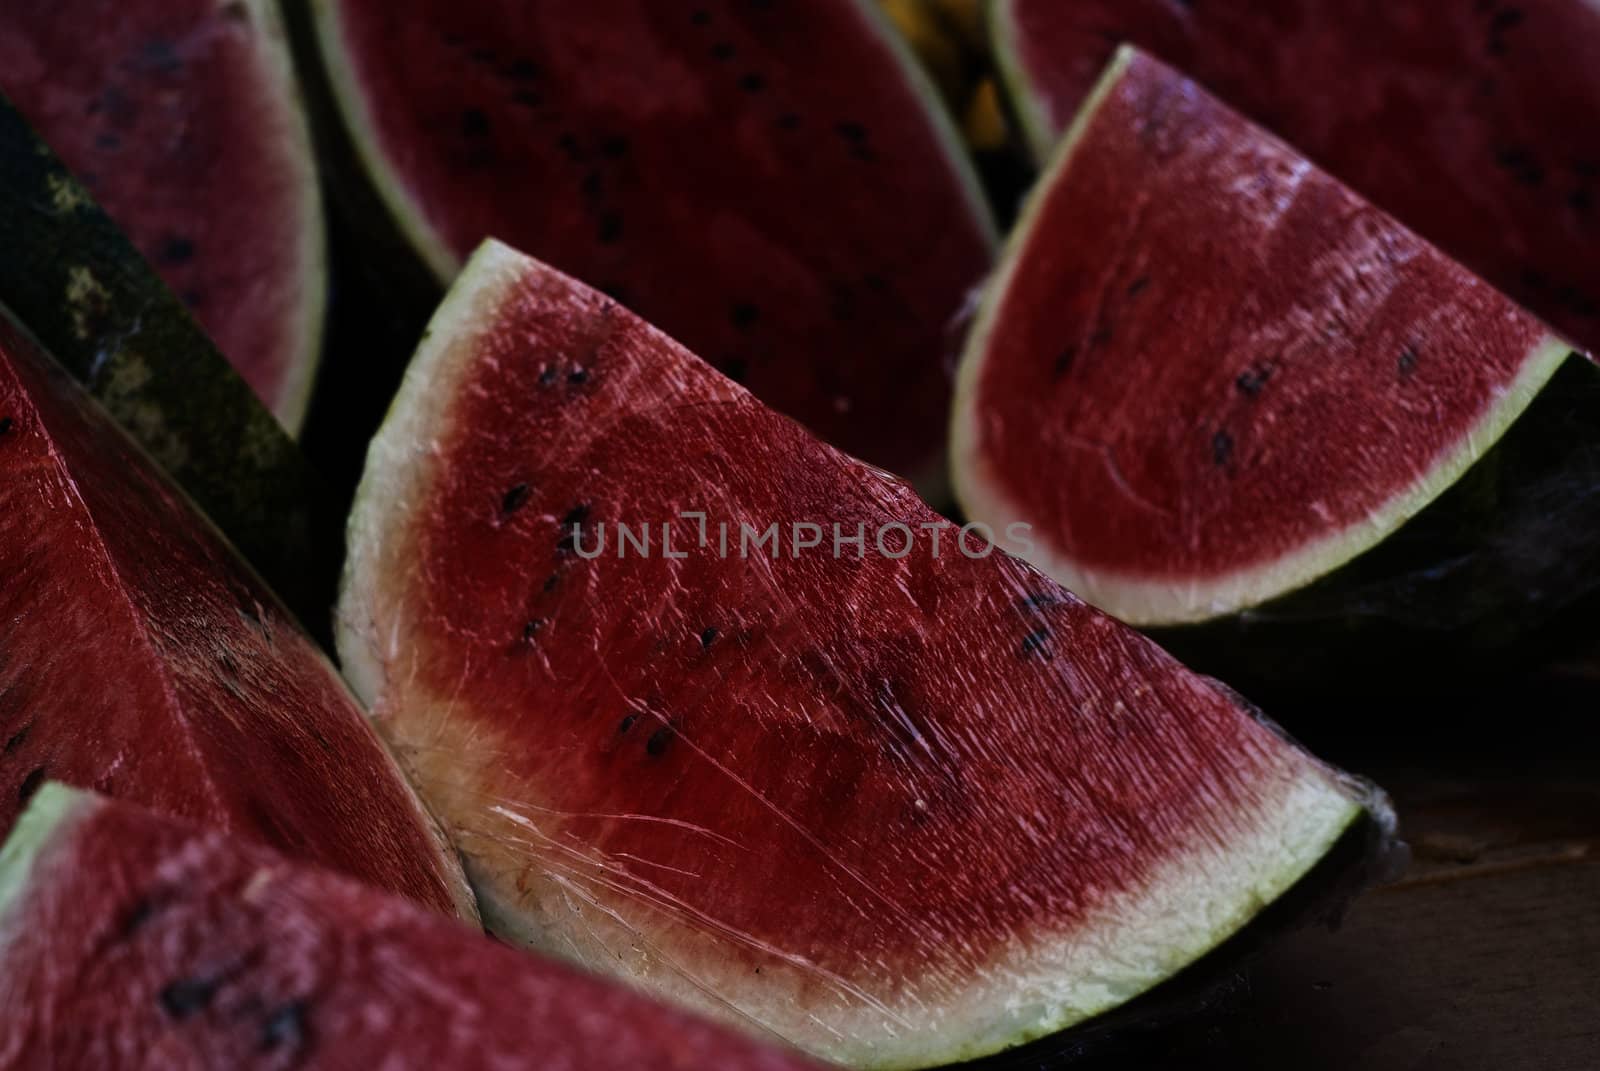 fresh water melon slices for sale at market